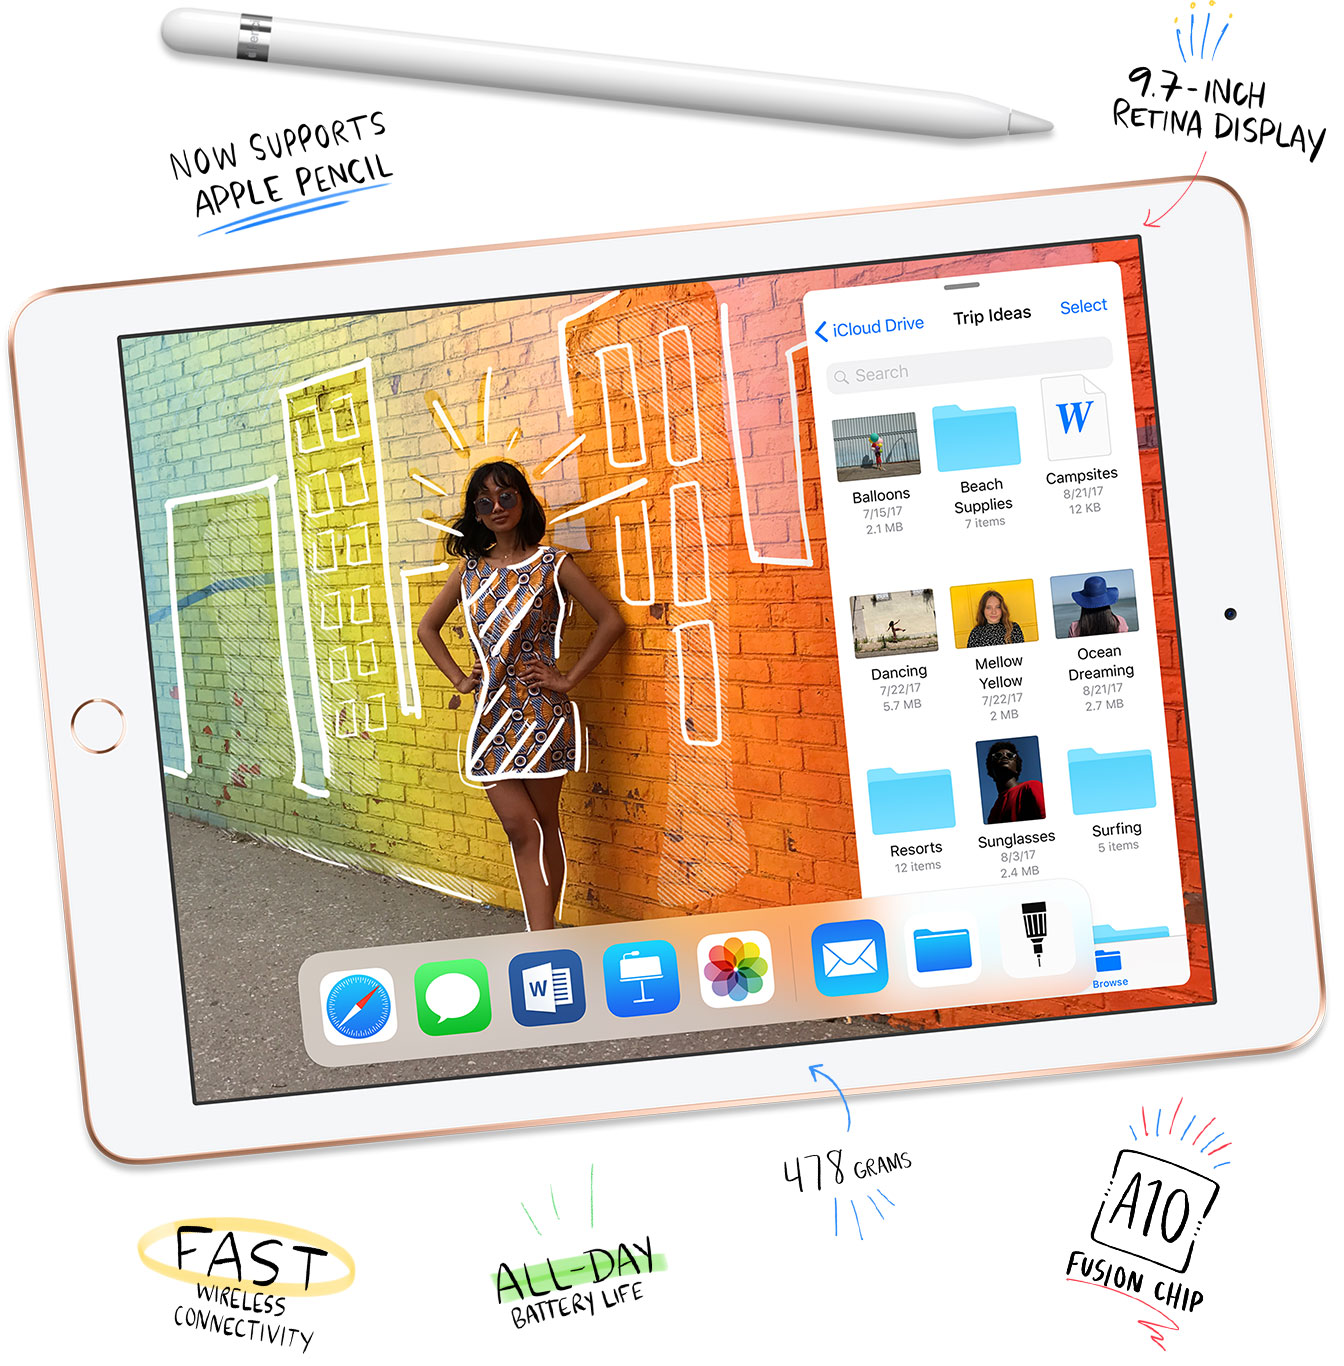 Now Supports Apple Pencil. 9.7-inch Retina Display. Fast Wireless Connectivity. All-Day Battery Life. 478 Grams. A10 Fusion chip.